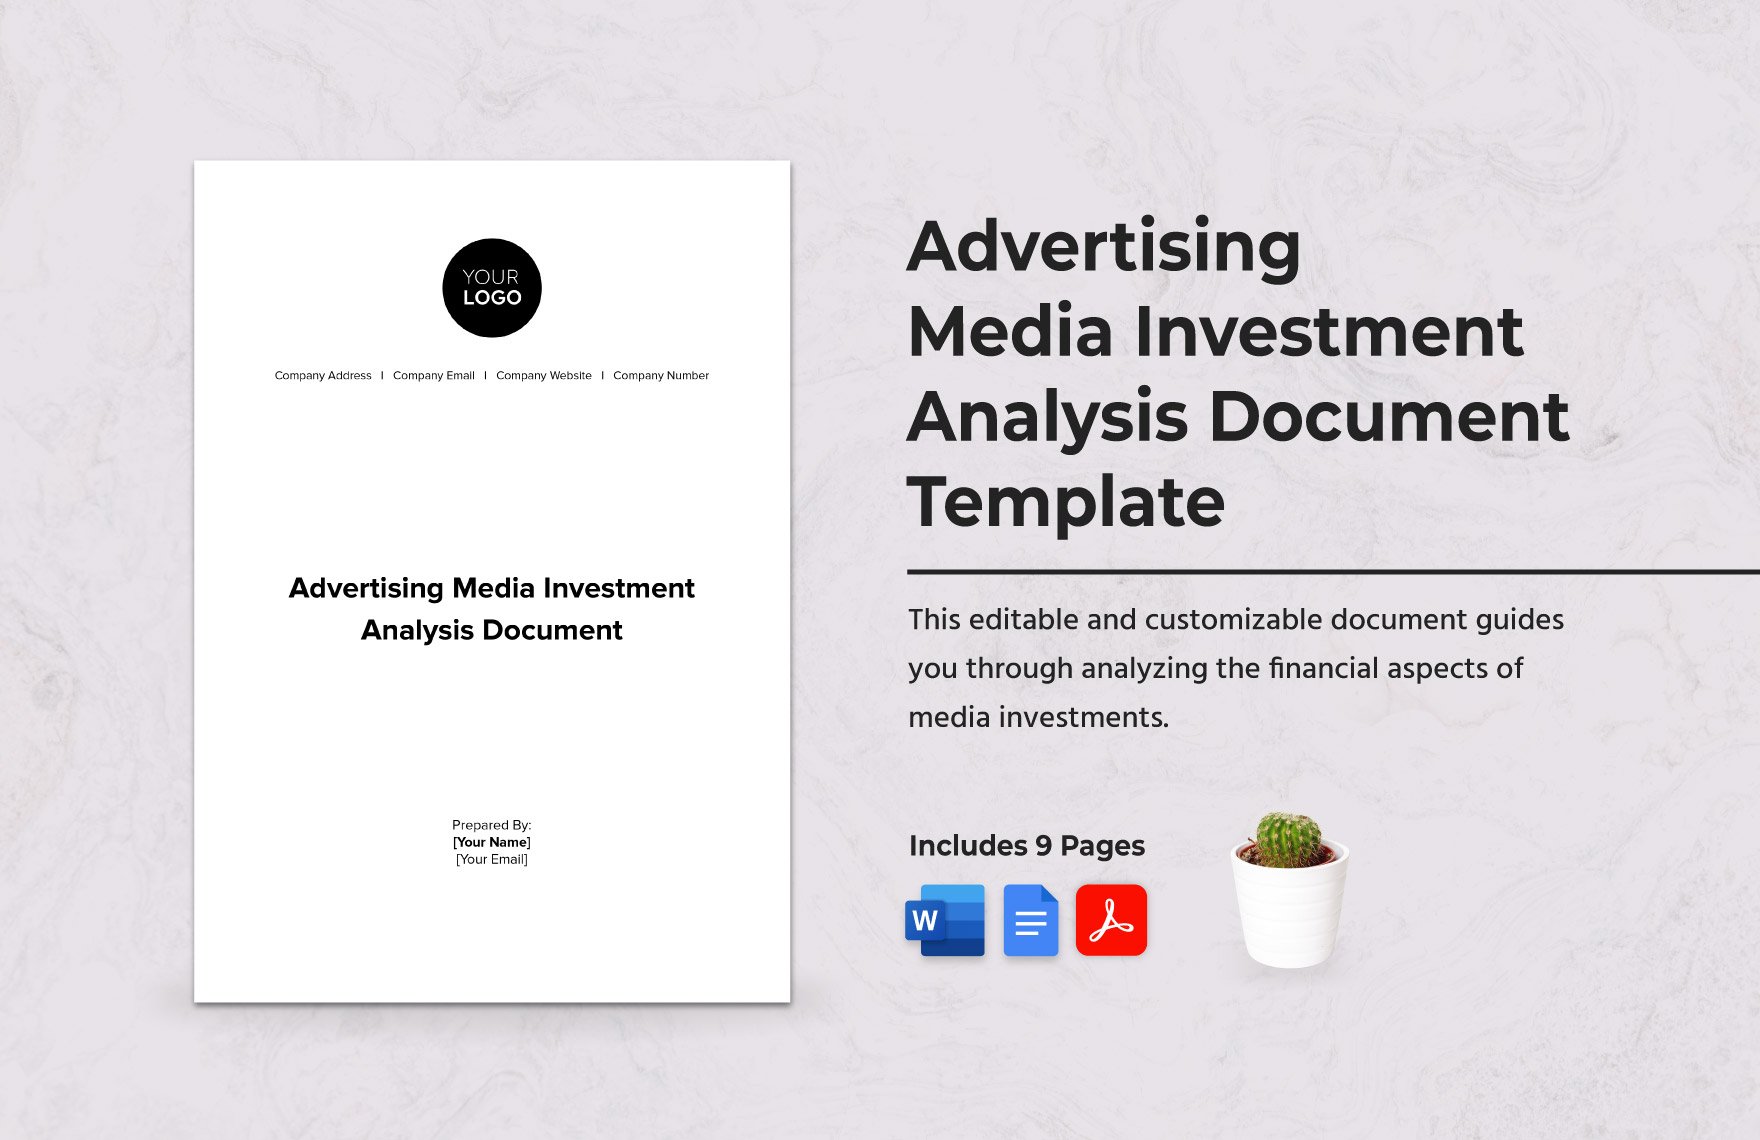 Advertising Media Investment Analysis Document Template  in Word, Google Docs, PDF